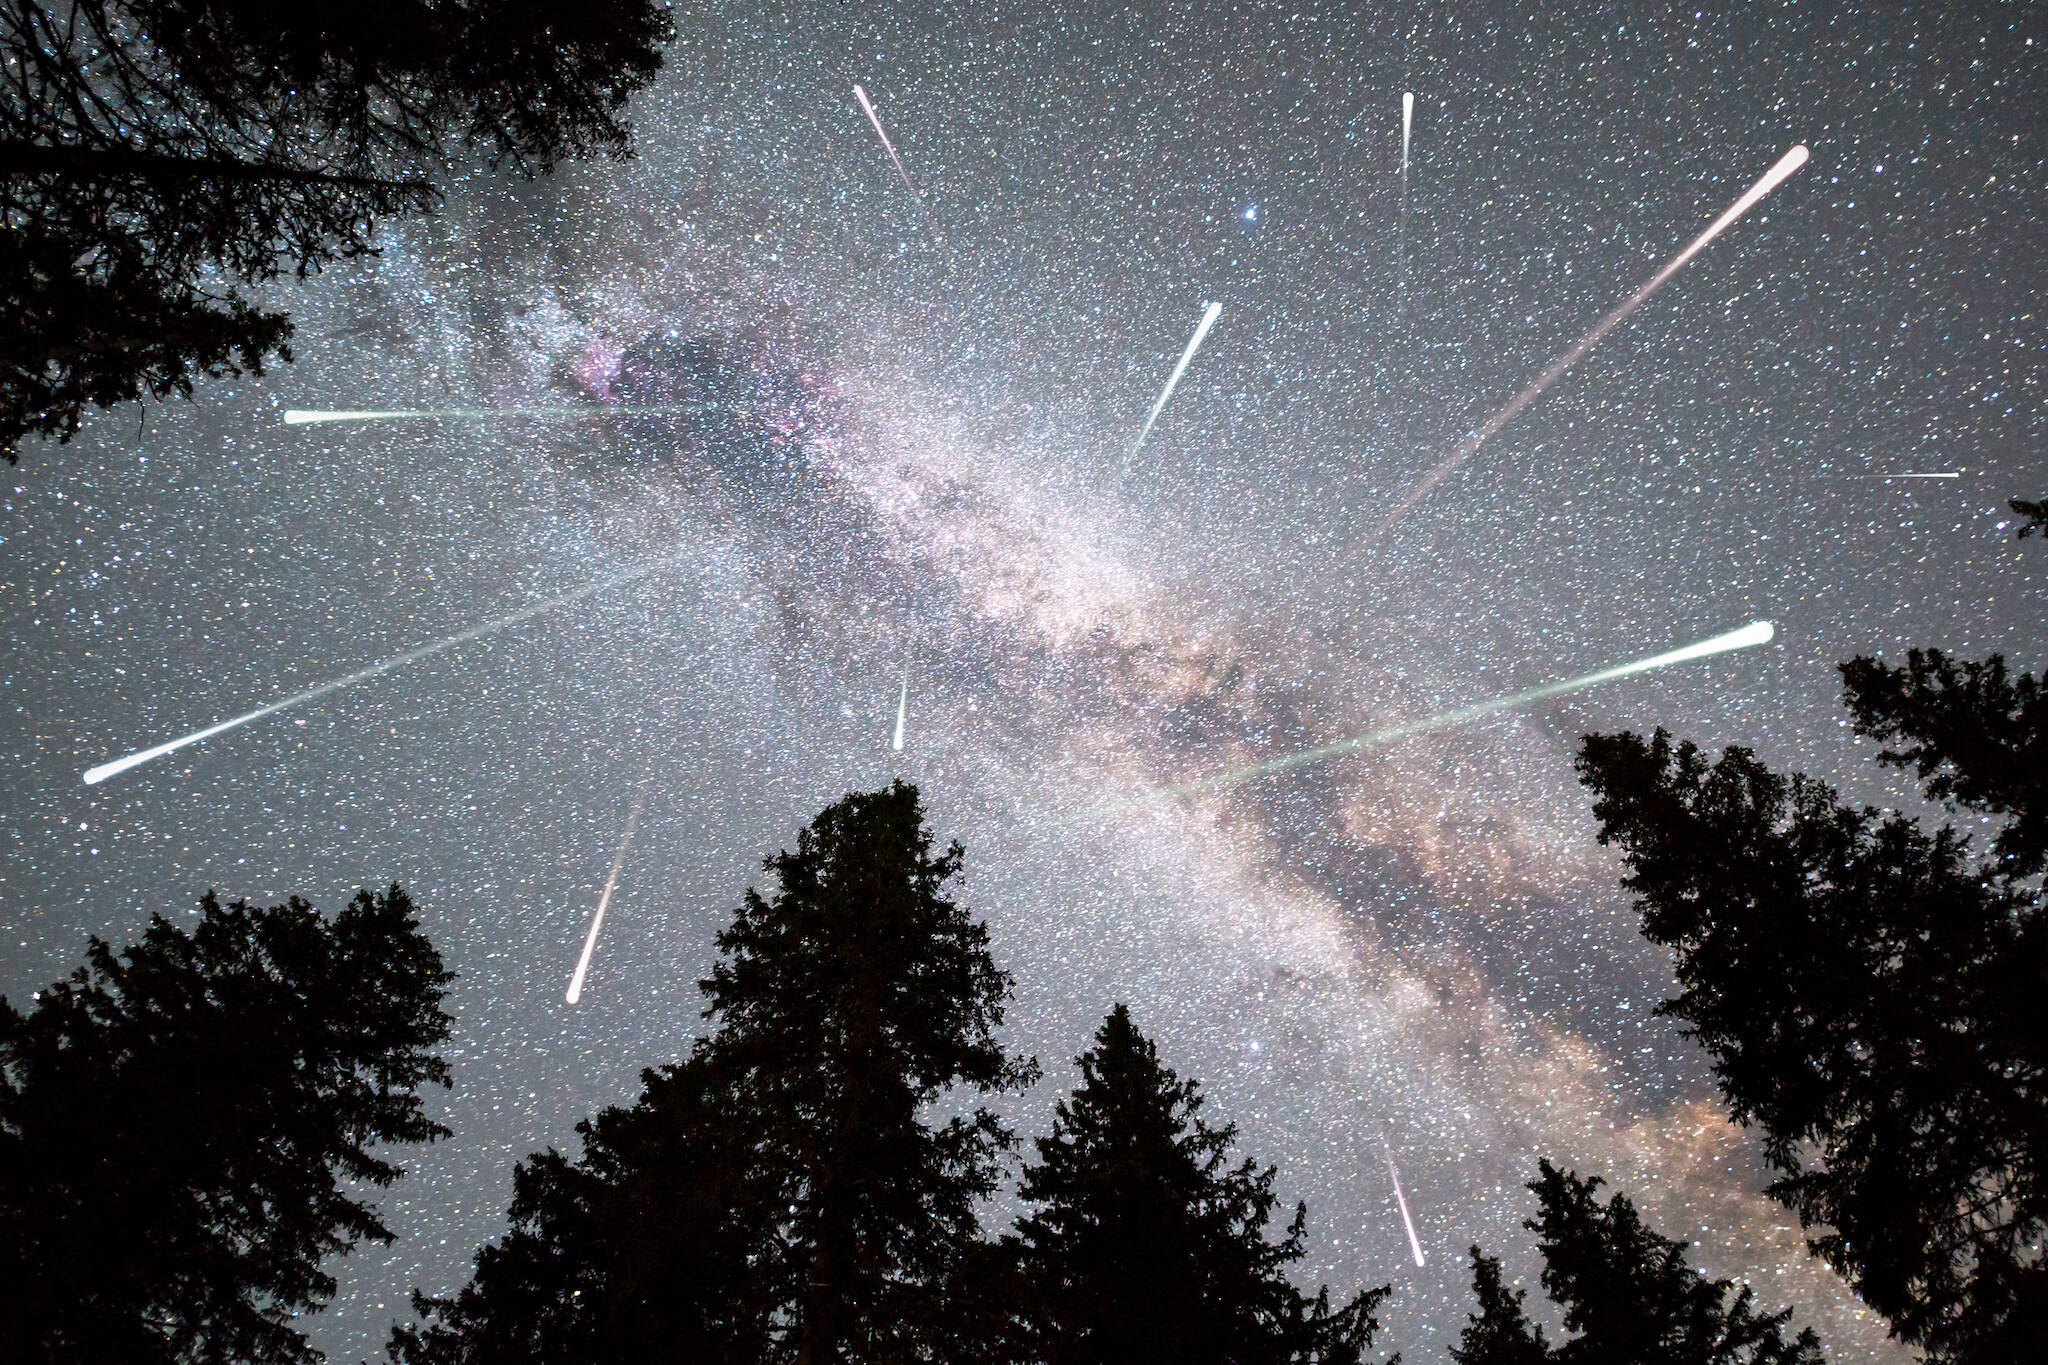 The Geminid meteor shower is about to peak in Toronto and here's how to